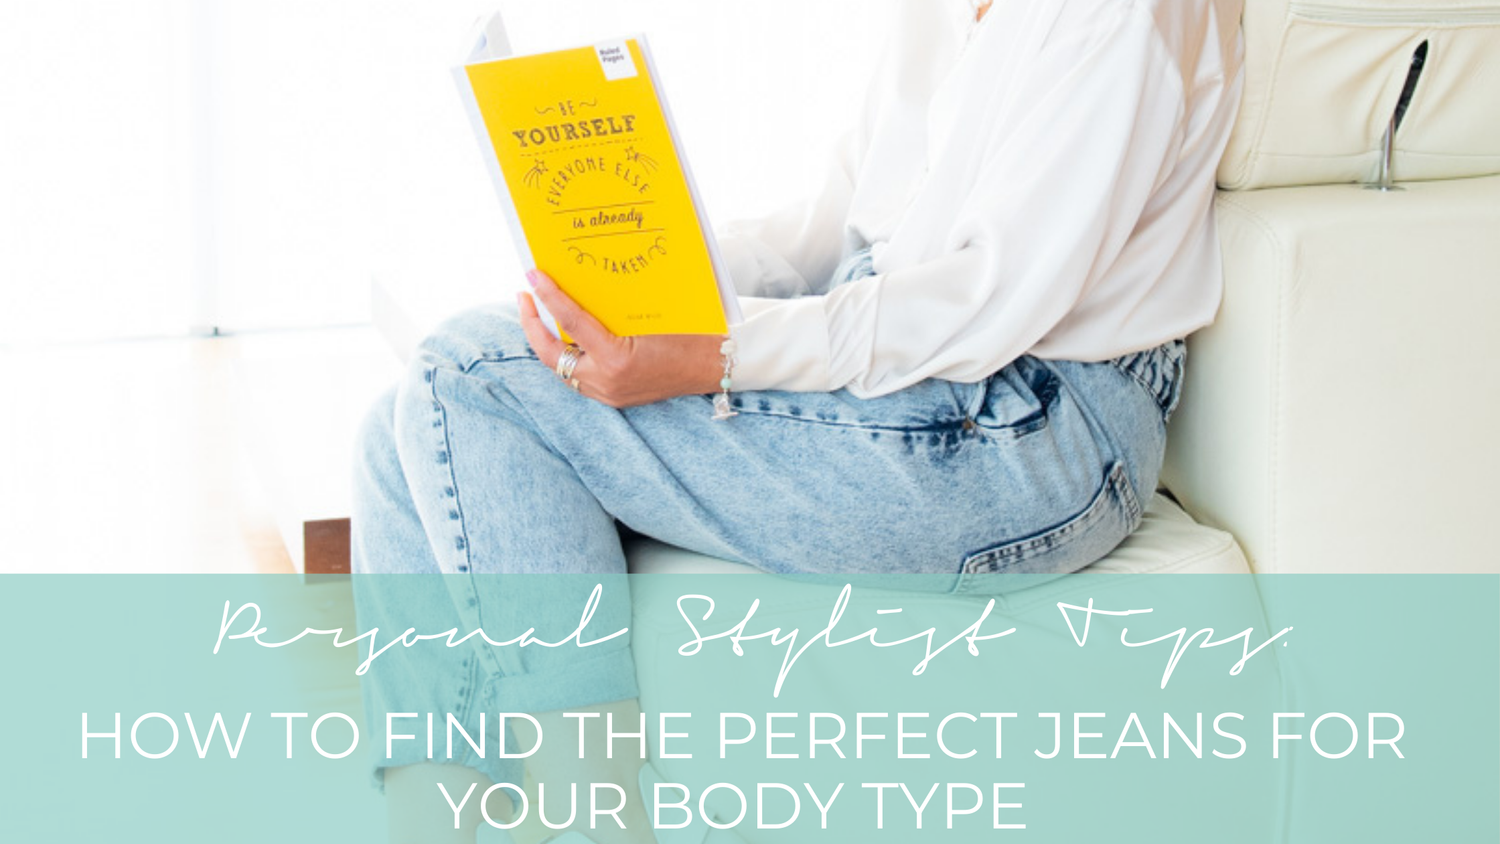 HOW TO PICK THE BEST JEANS FOR YOUR BODY TYPE